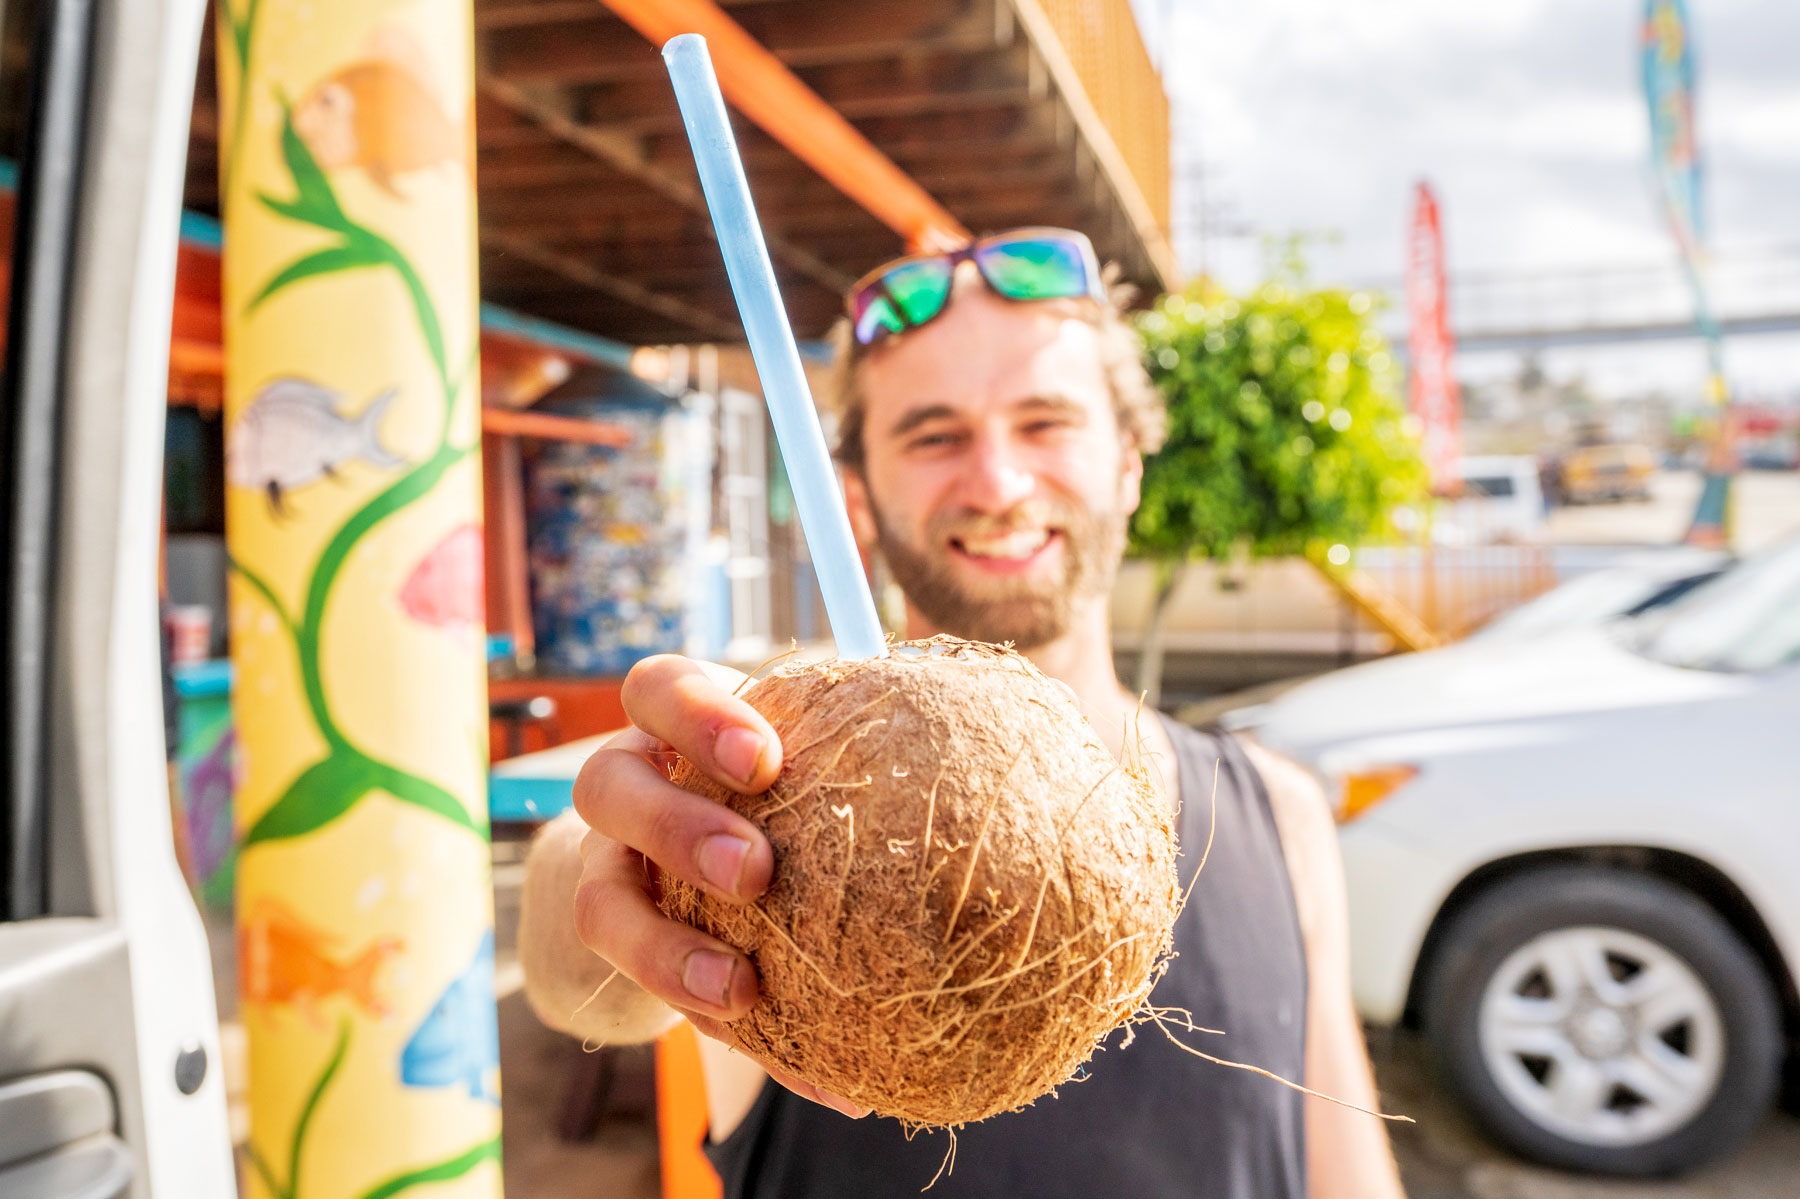 Smiling man holding a coconut toward the camera